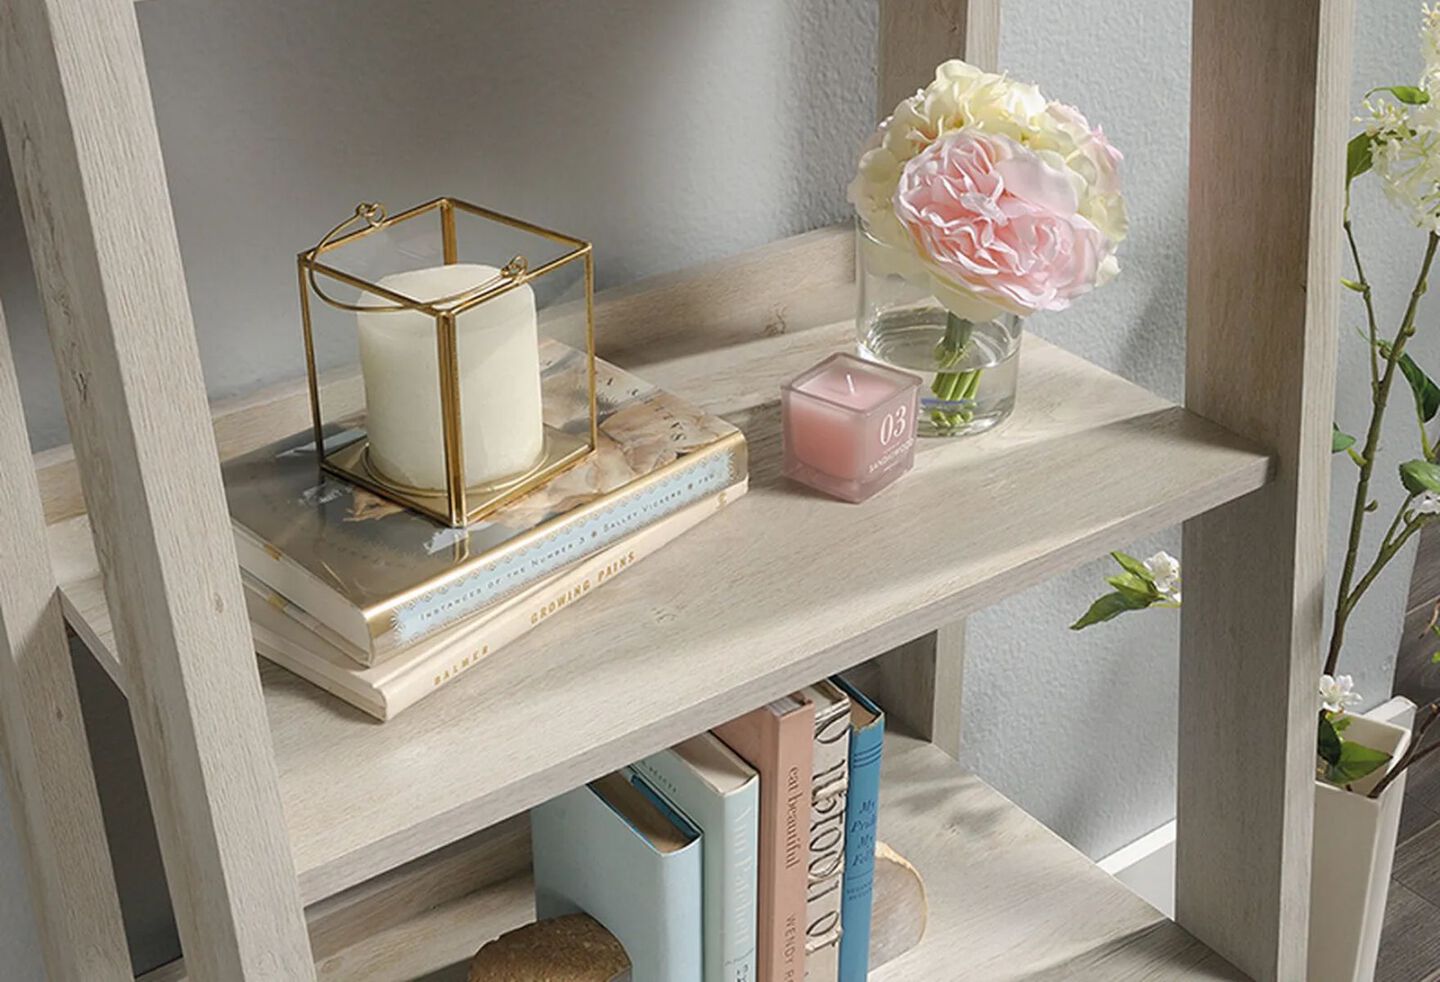 Light wooden bookshelf with books, a vase, and two candles on the shelves